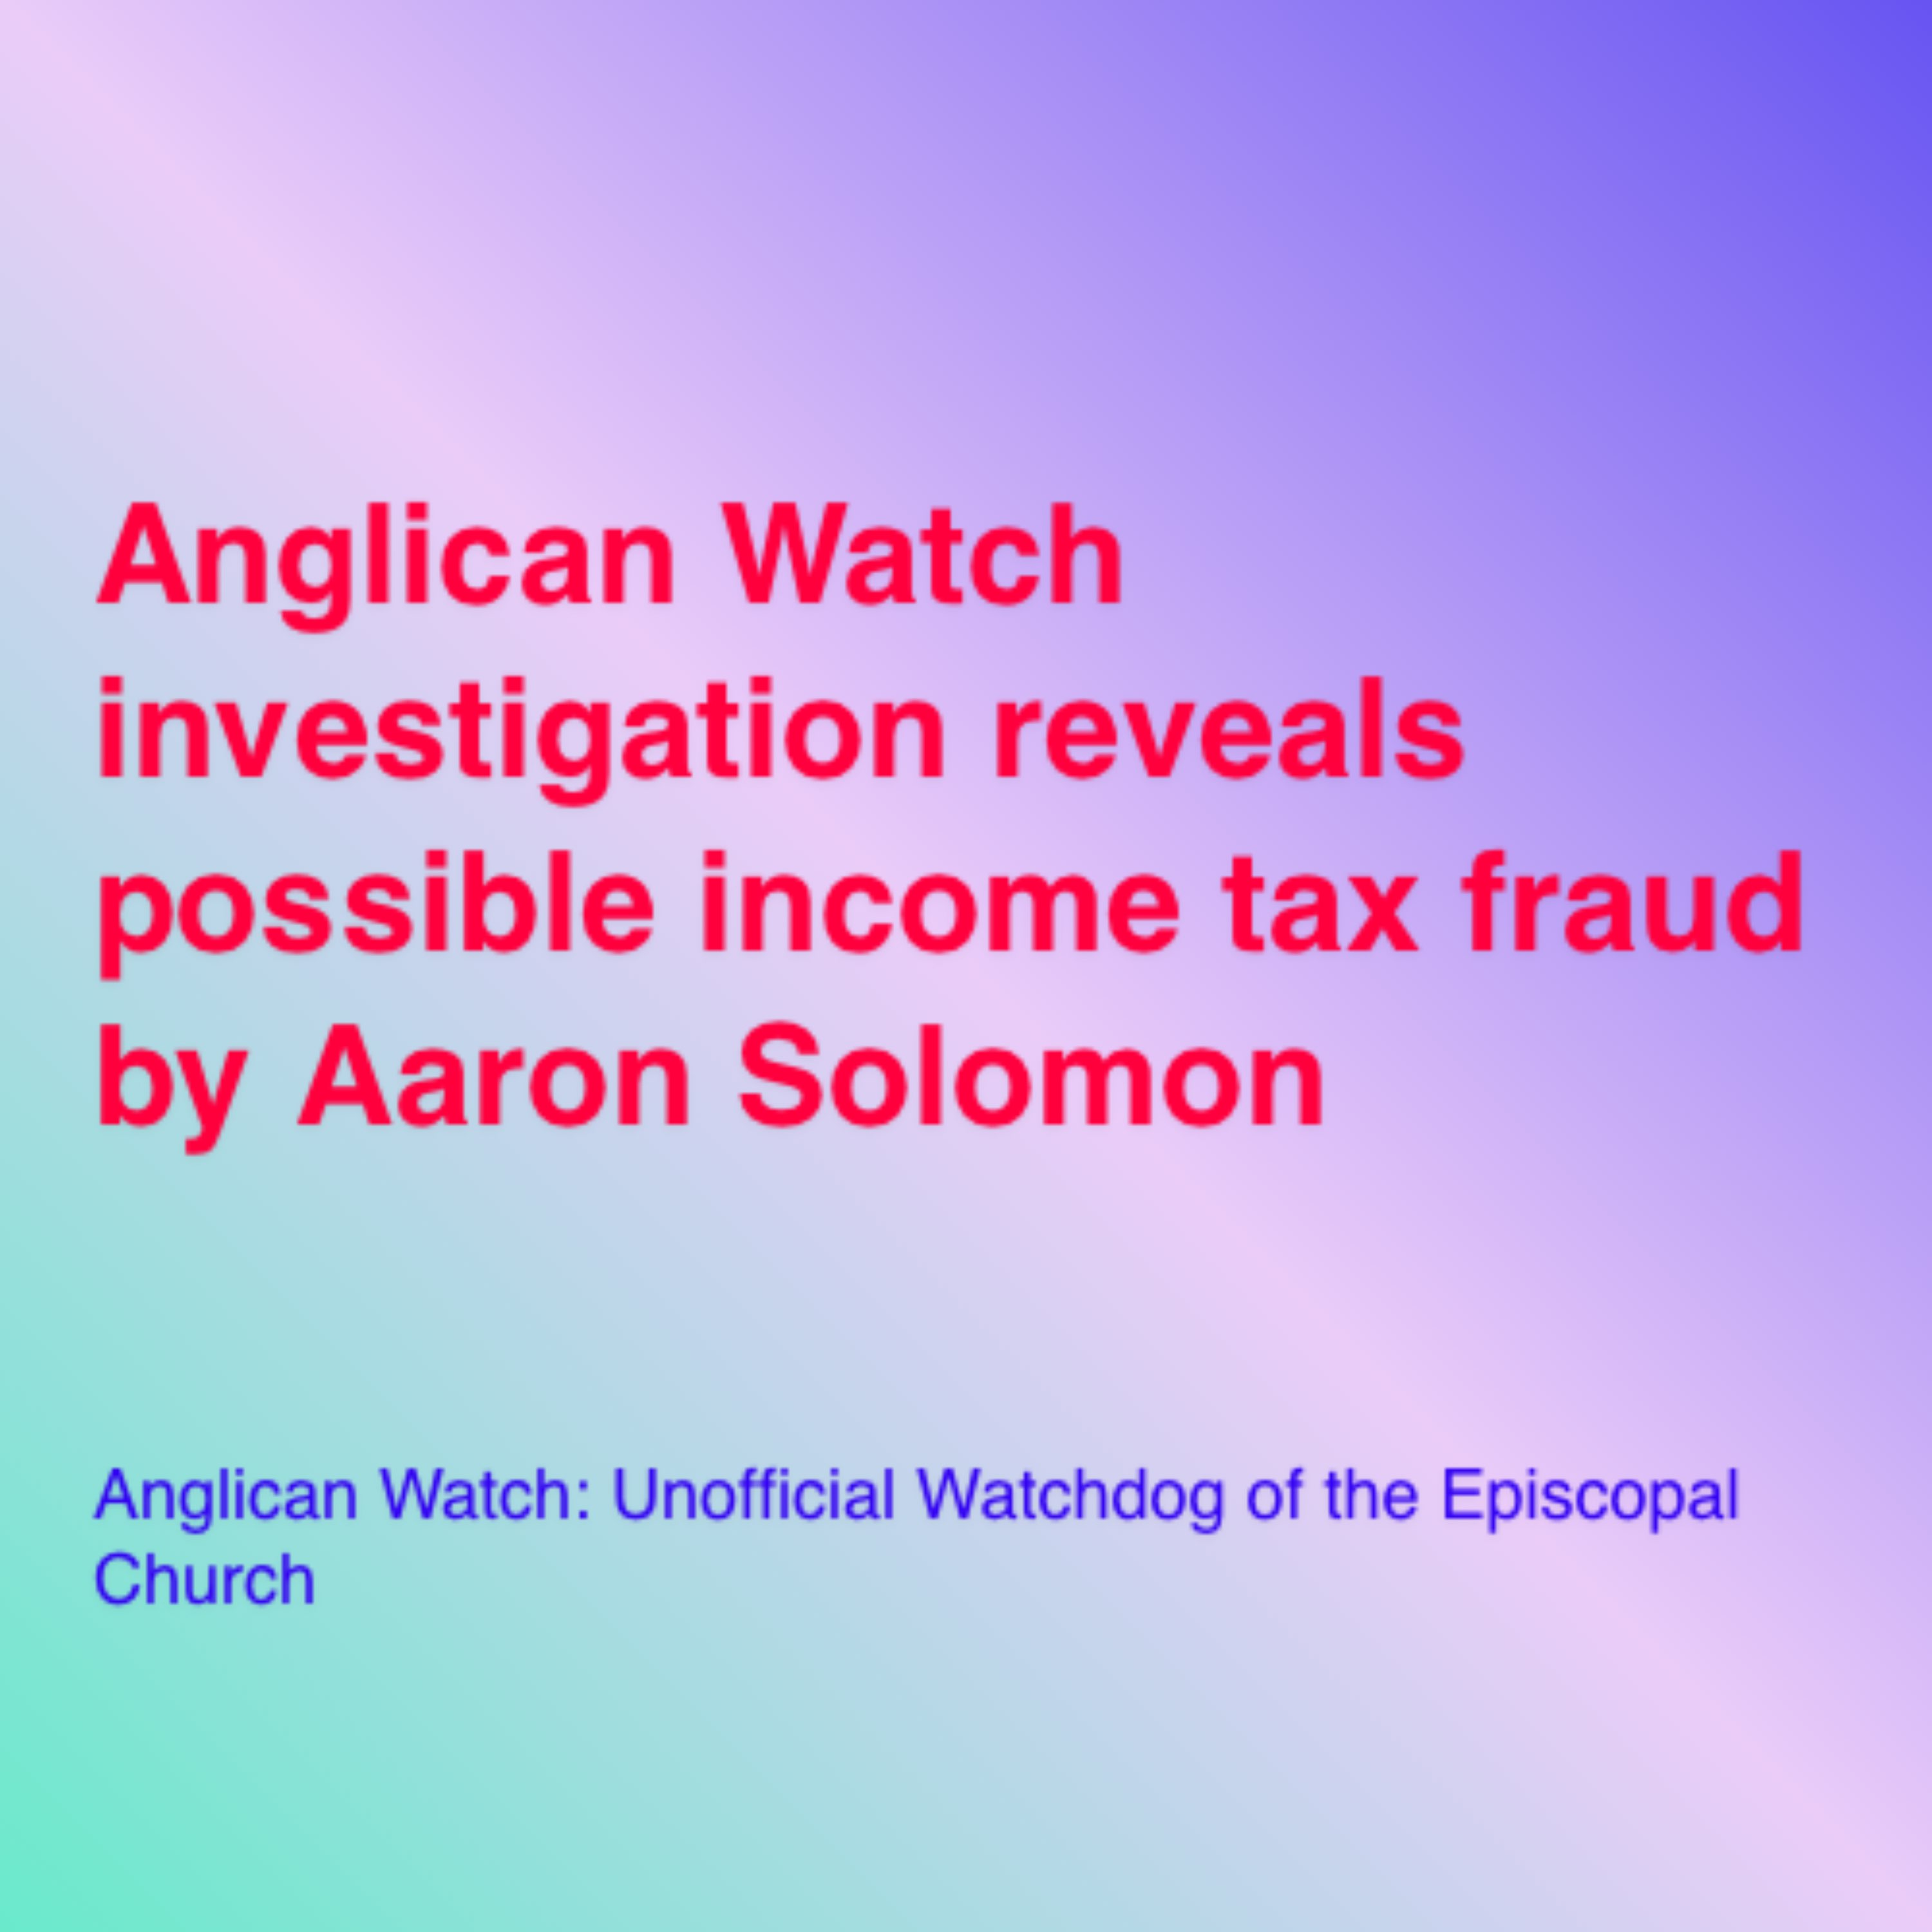 Anglican Watch investigation reveals possible income tax fraud by Aaron Solomon